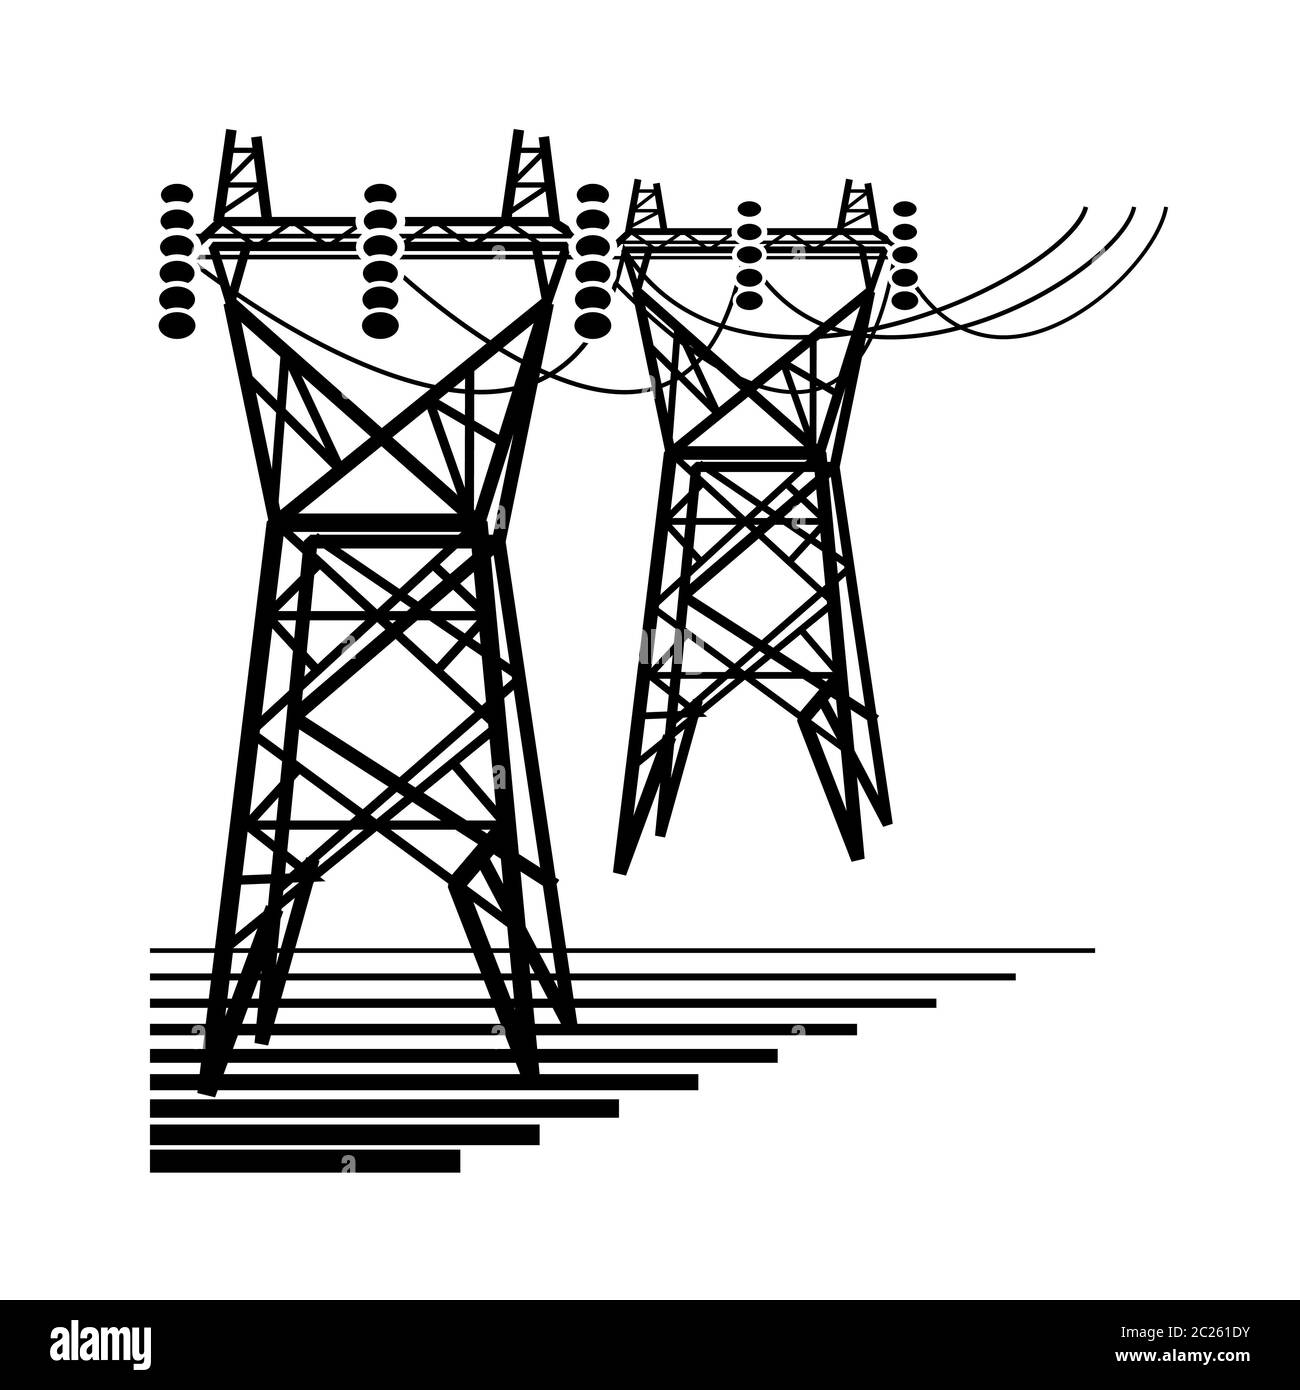 Electricity. The electric power transmission towers of high voltage line. Stock Photo